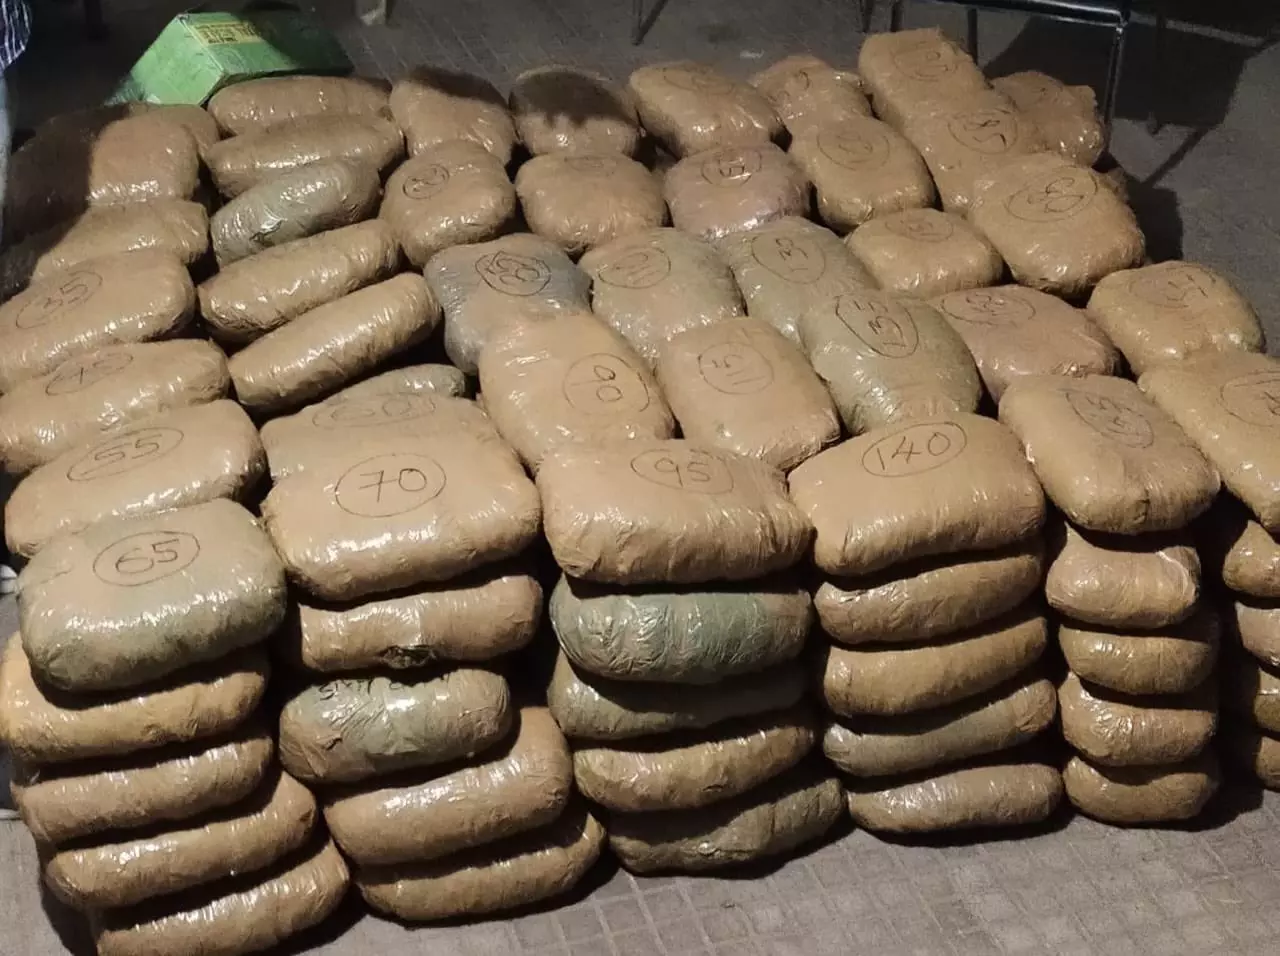 Operation narcos helps RPF recover 1084.49 kgs narcotics worth Rs.2.70 cr